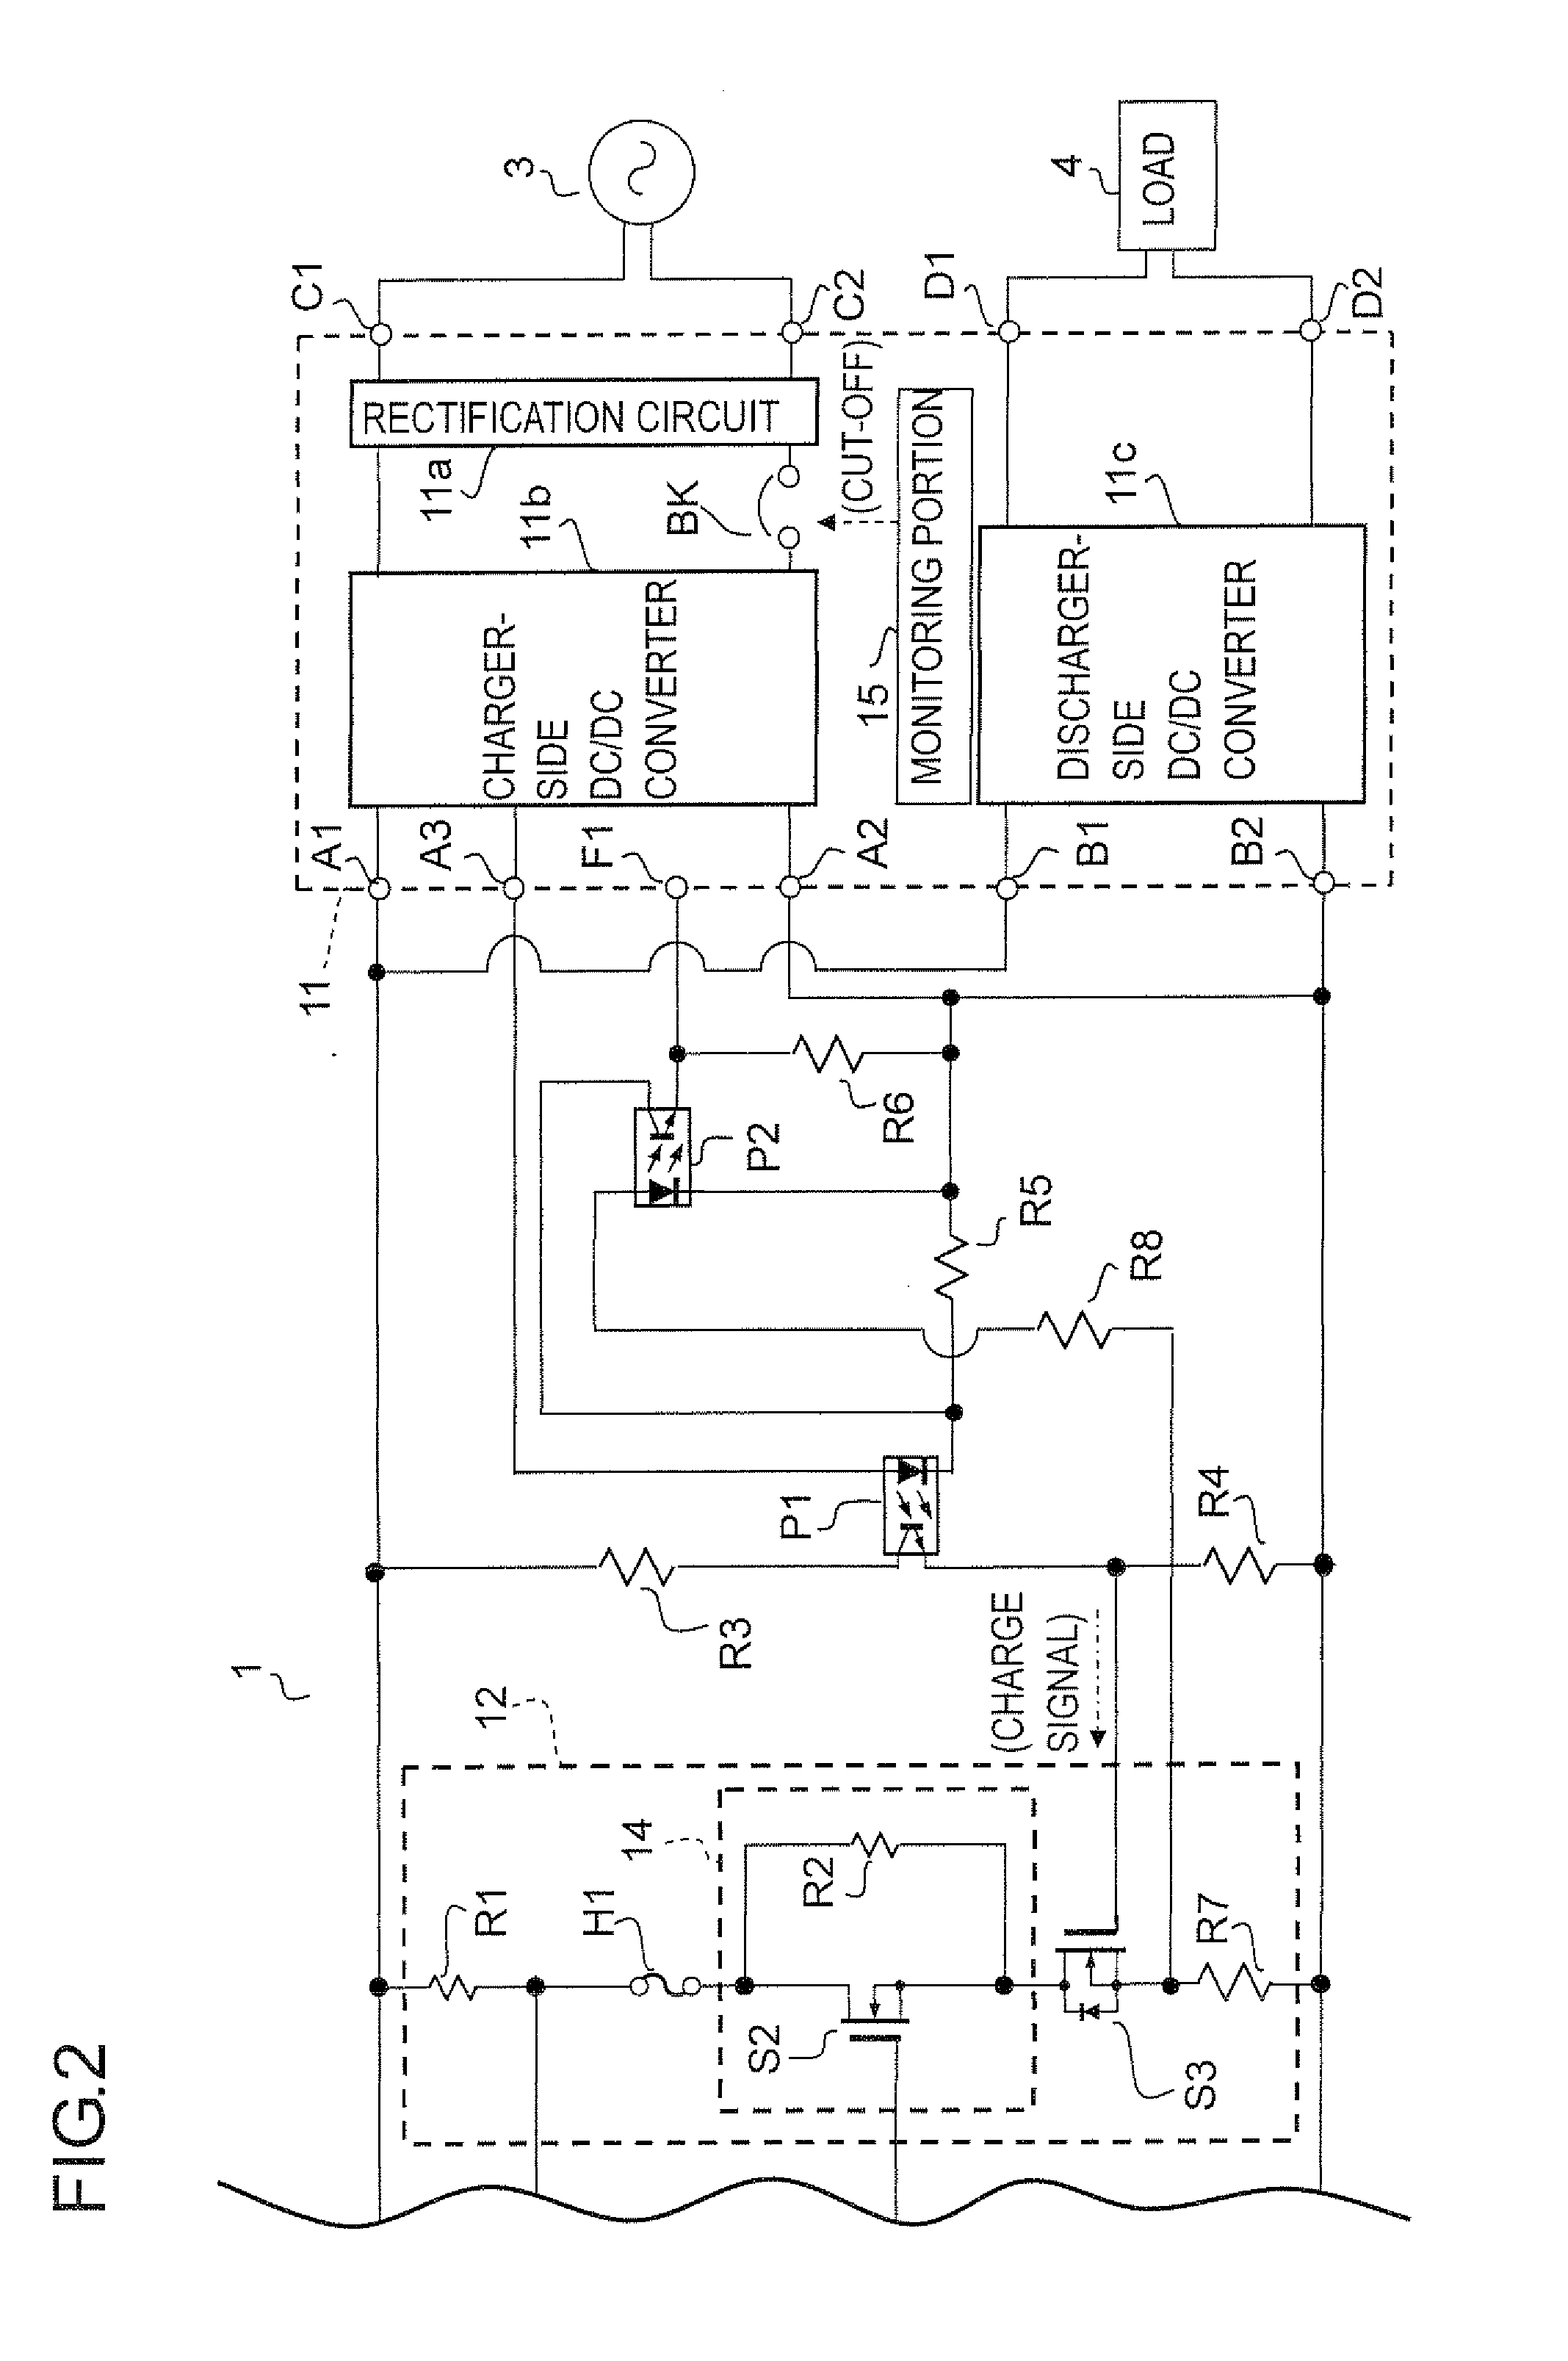 Secondary battery protection circuit